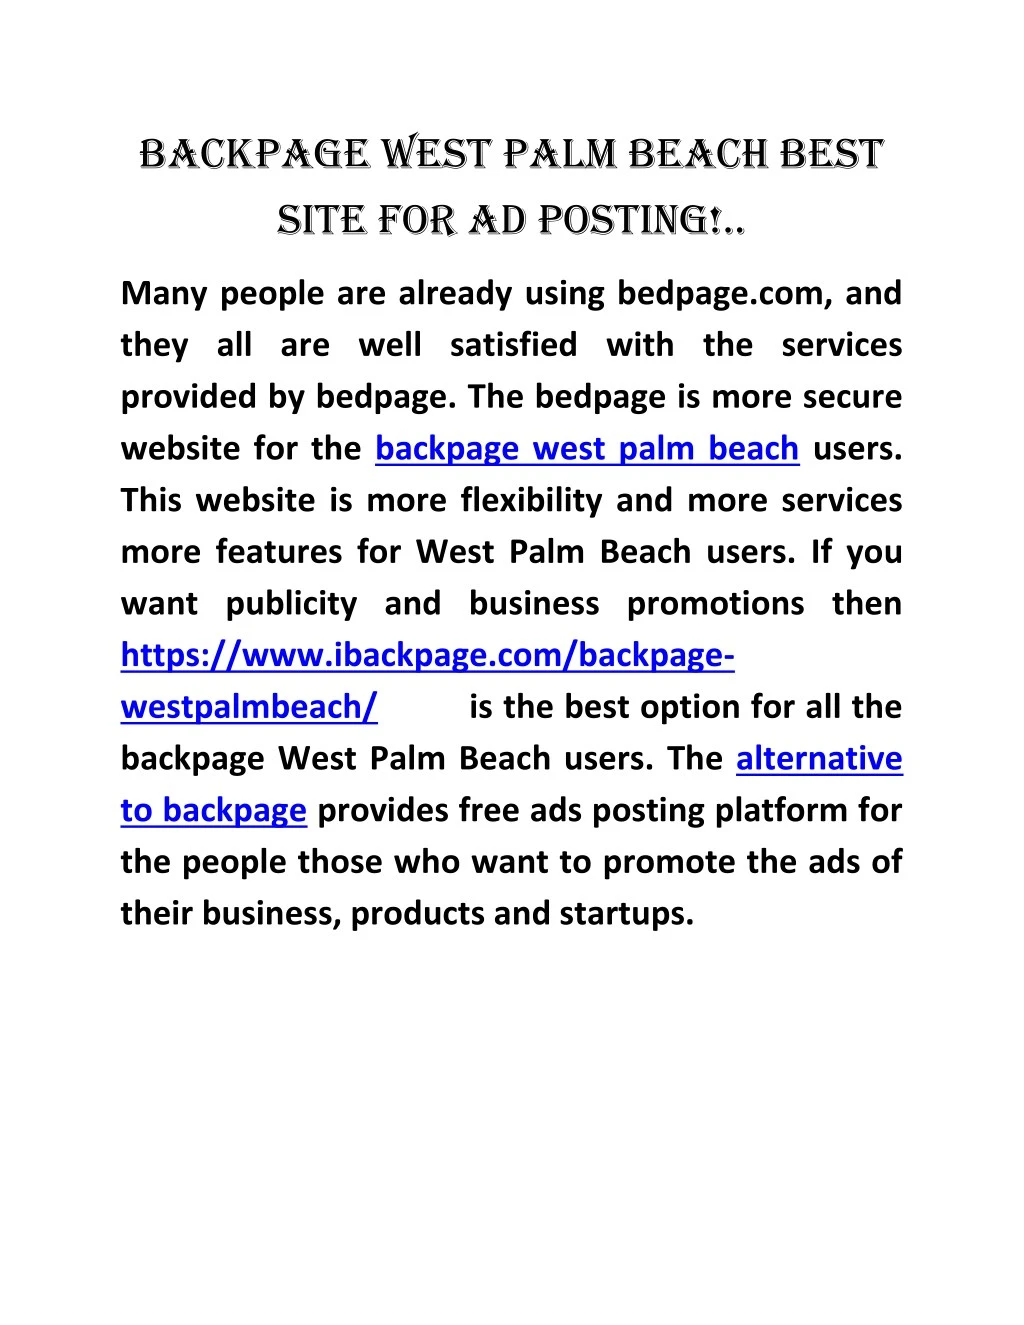 backpage west palm beach best site for ad posting n.